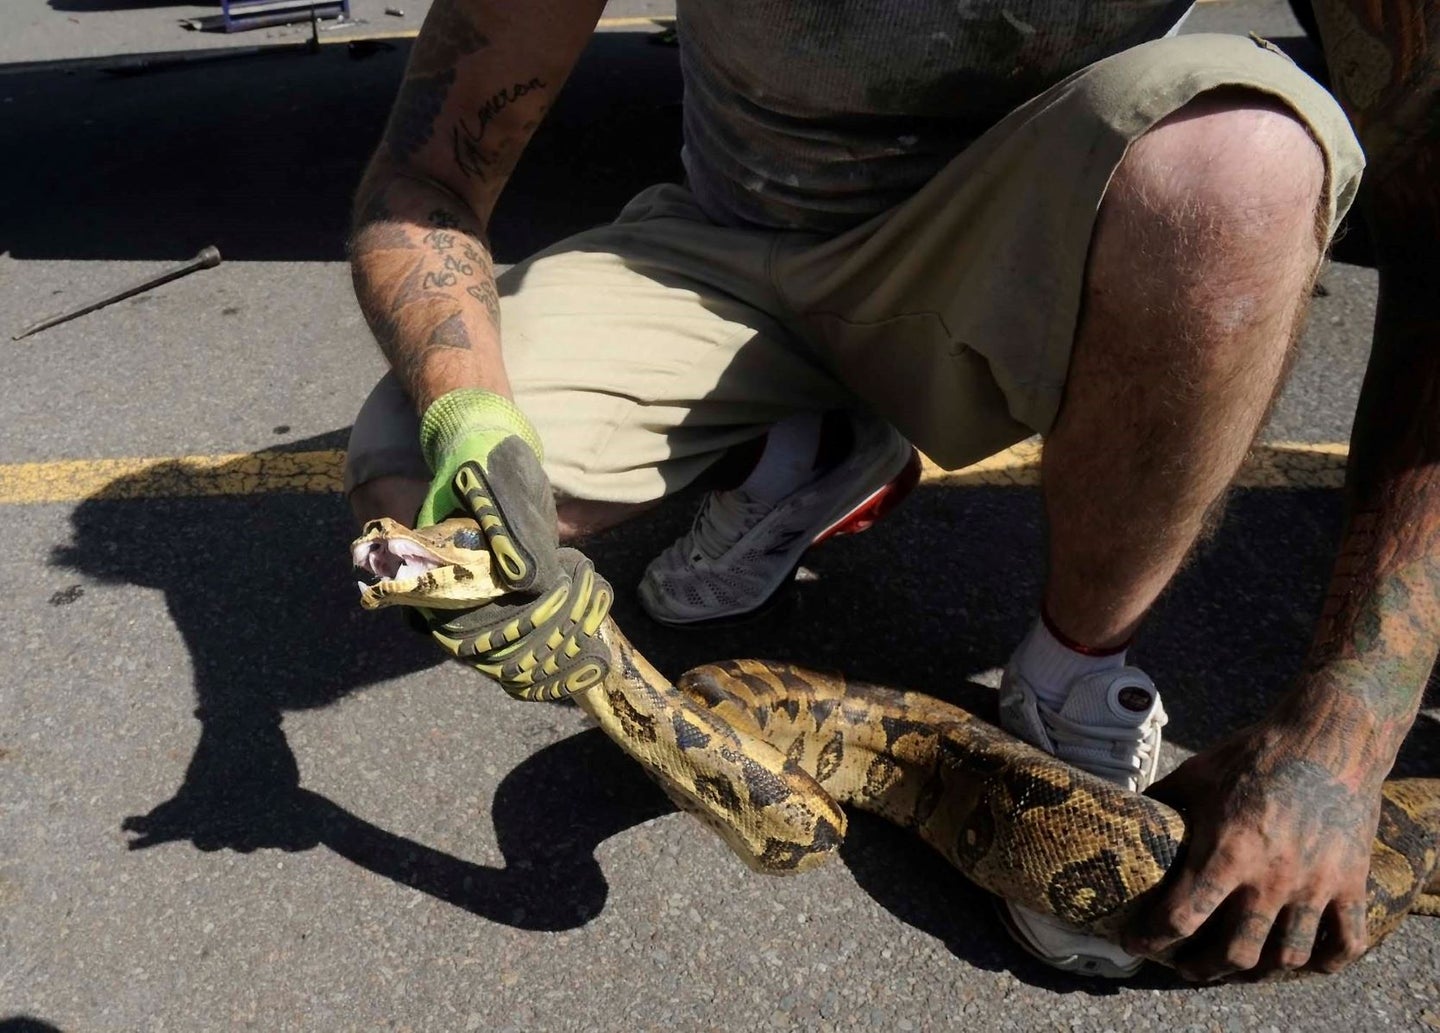 Boa Constrictor Found Under Hood of Car in Massachusetts